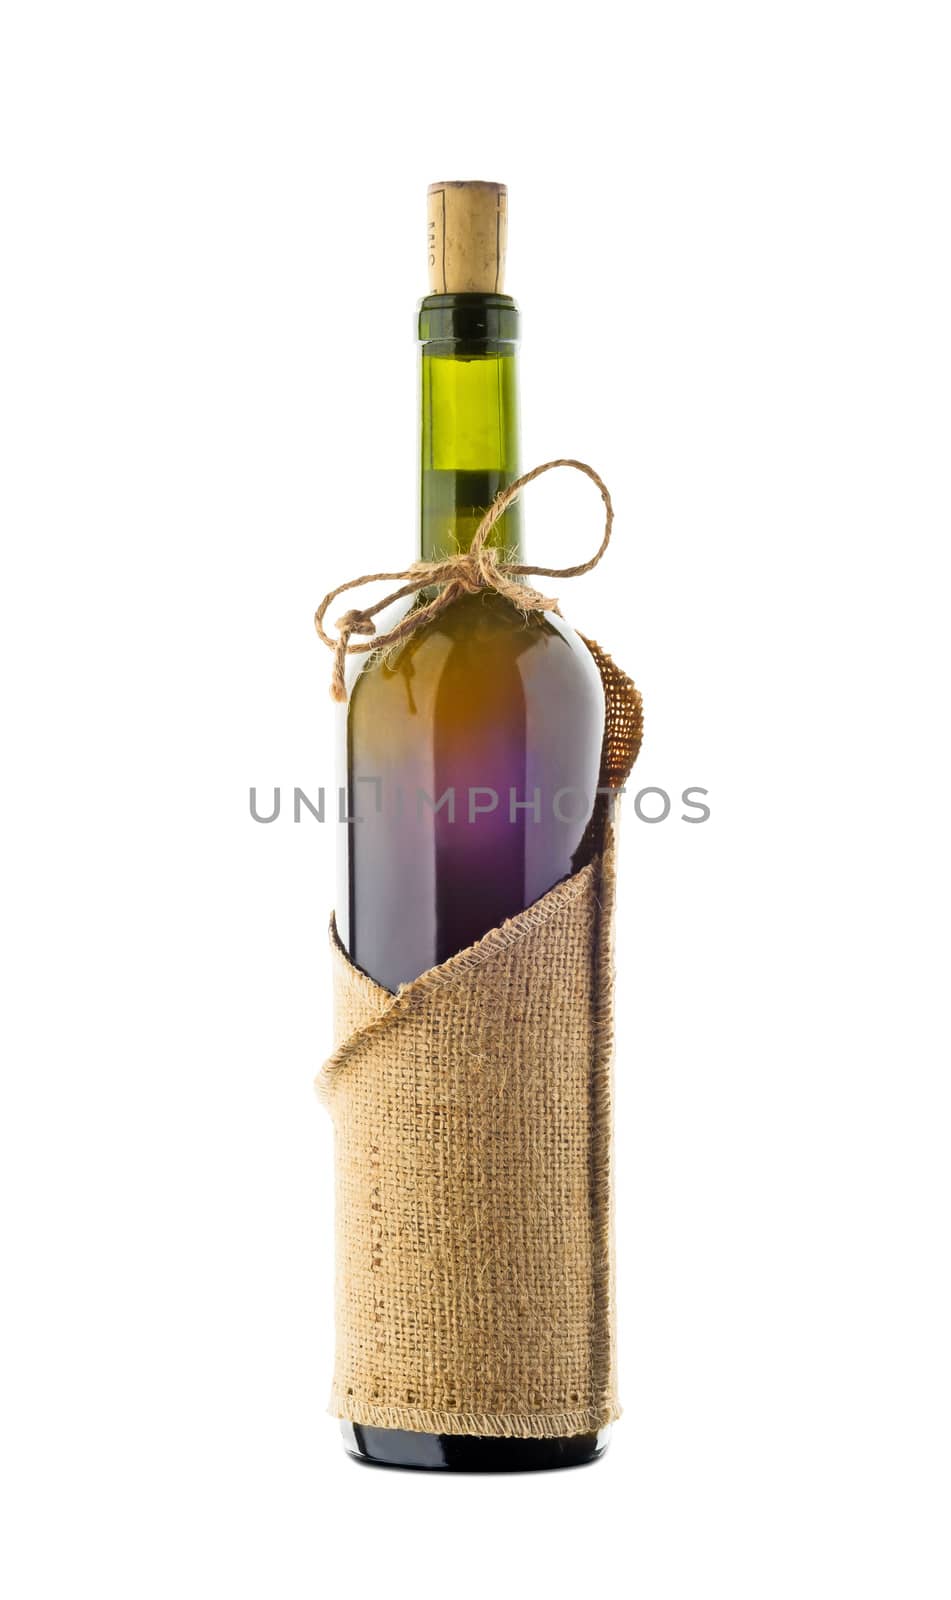 A bottle full of red wine with a rustic jute 
sheath